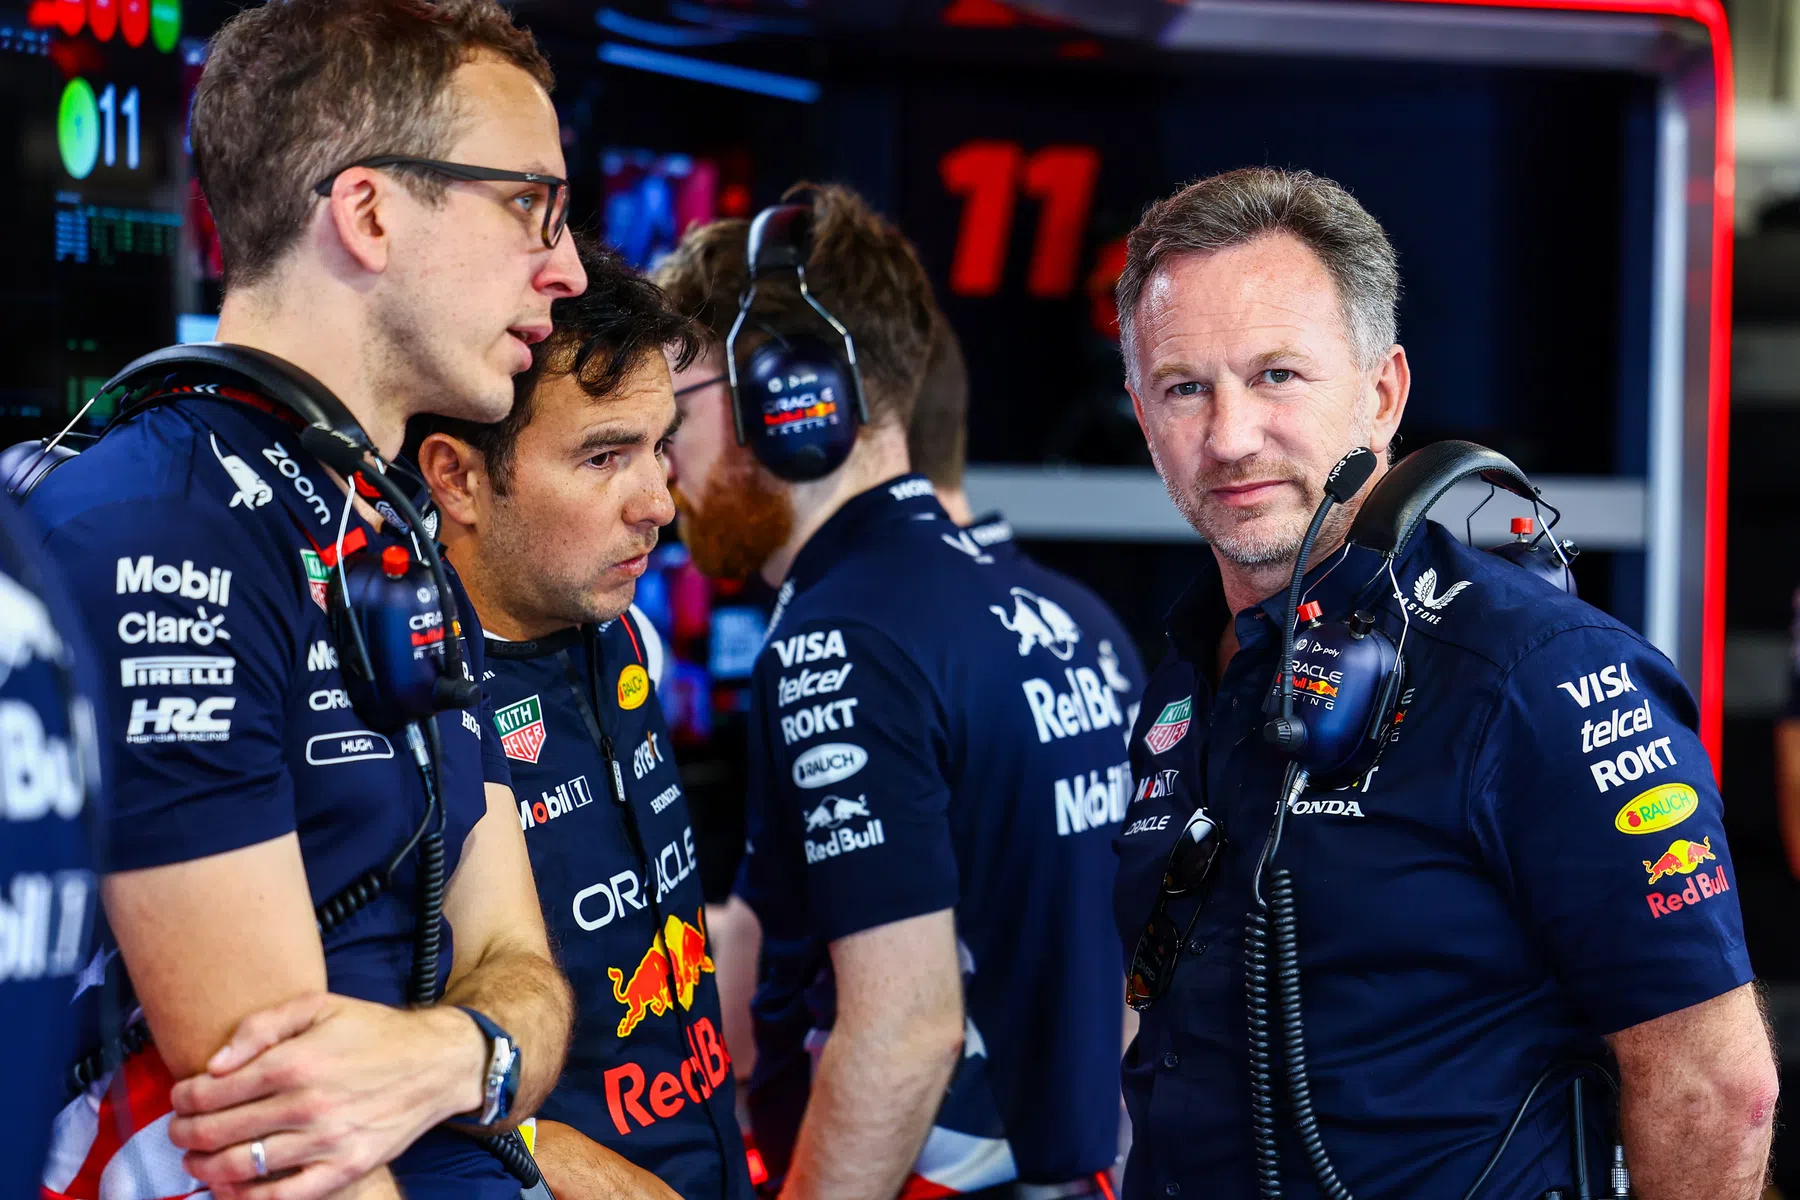 How Red Bull escalated the situation with Perez